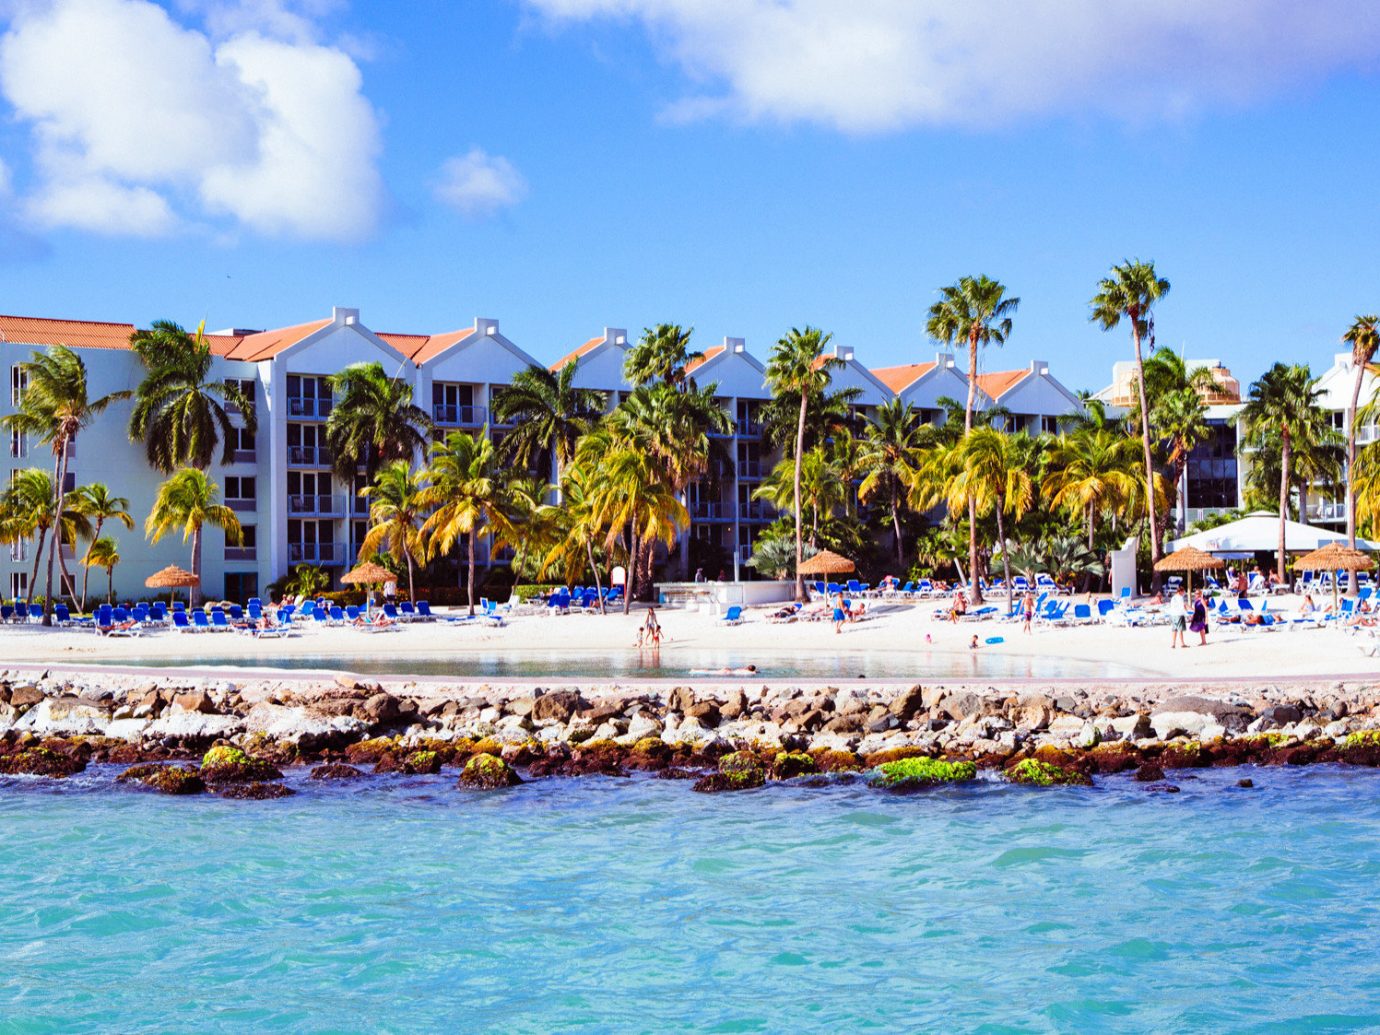 Architecture Aruba Beachfront Buildings Exterior Grounds Hotels sky outdoor water Beach leisure Resort vacation Sea caribbean swimming pool Water park bay amusement park Lagoon Harbor Island park lined swimming colorful sandy